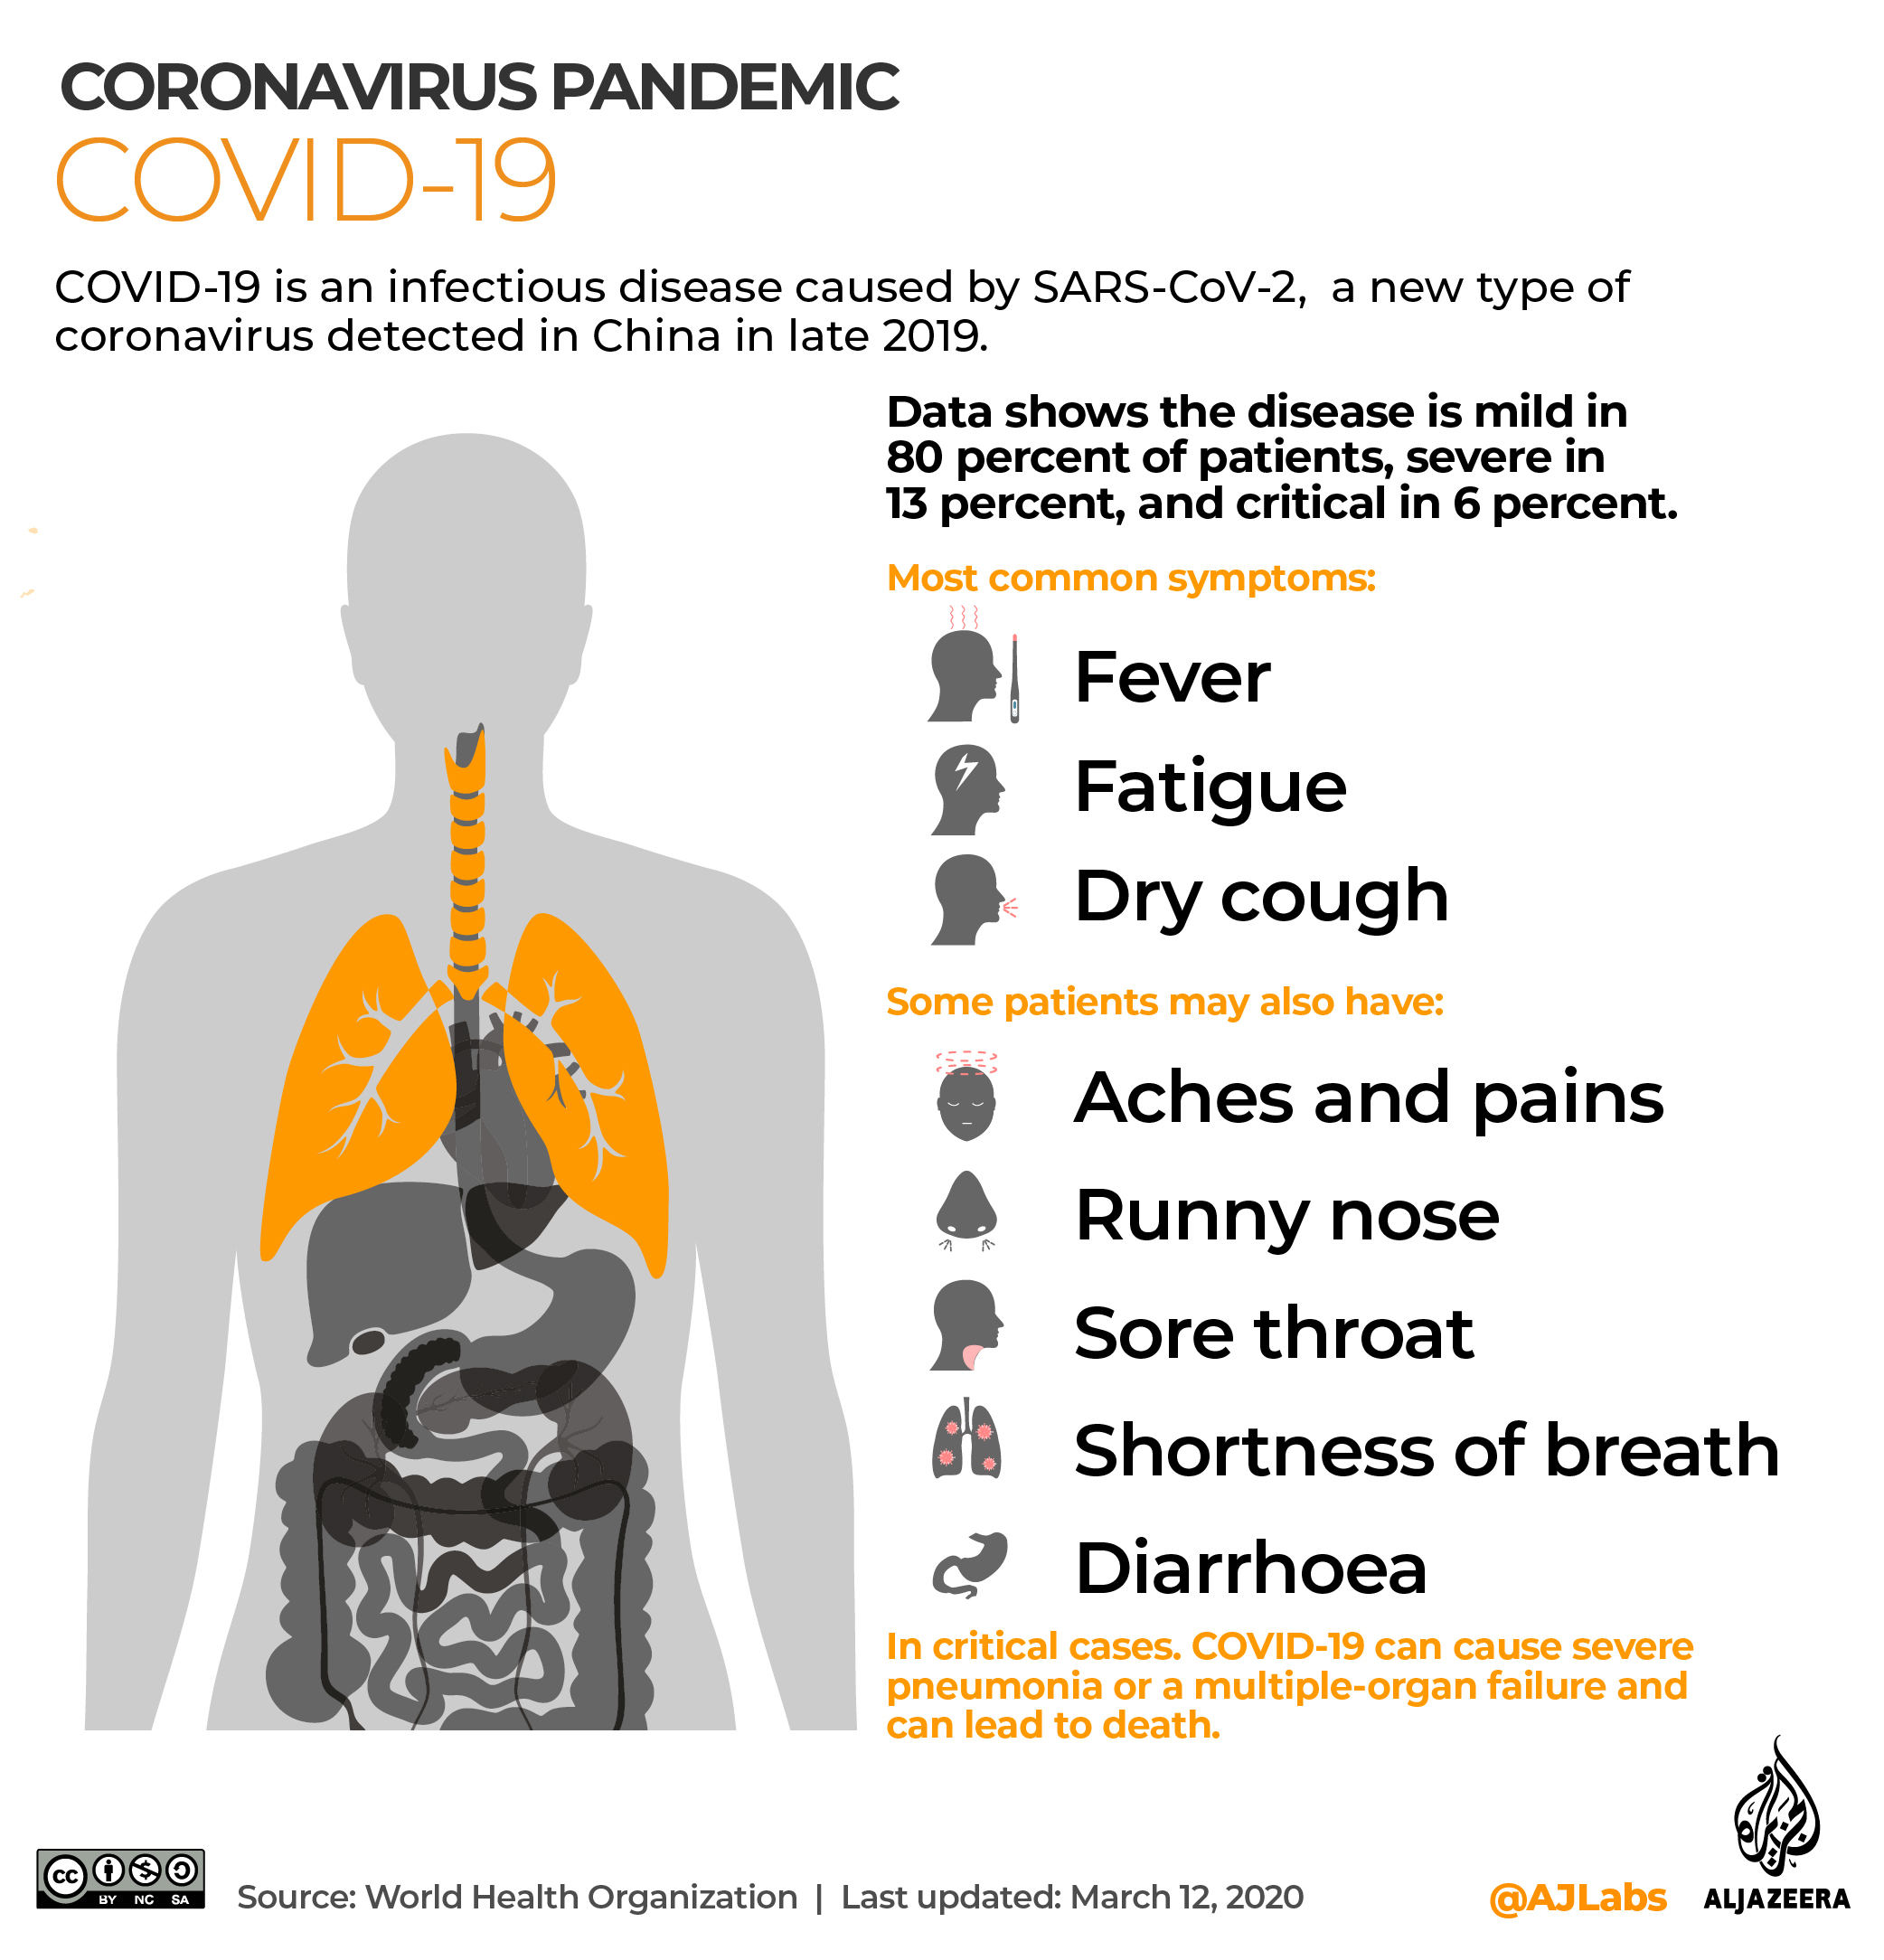 Coronavirus: All you need to know about symptoms and risks